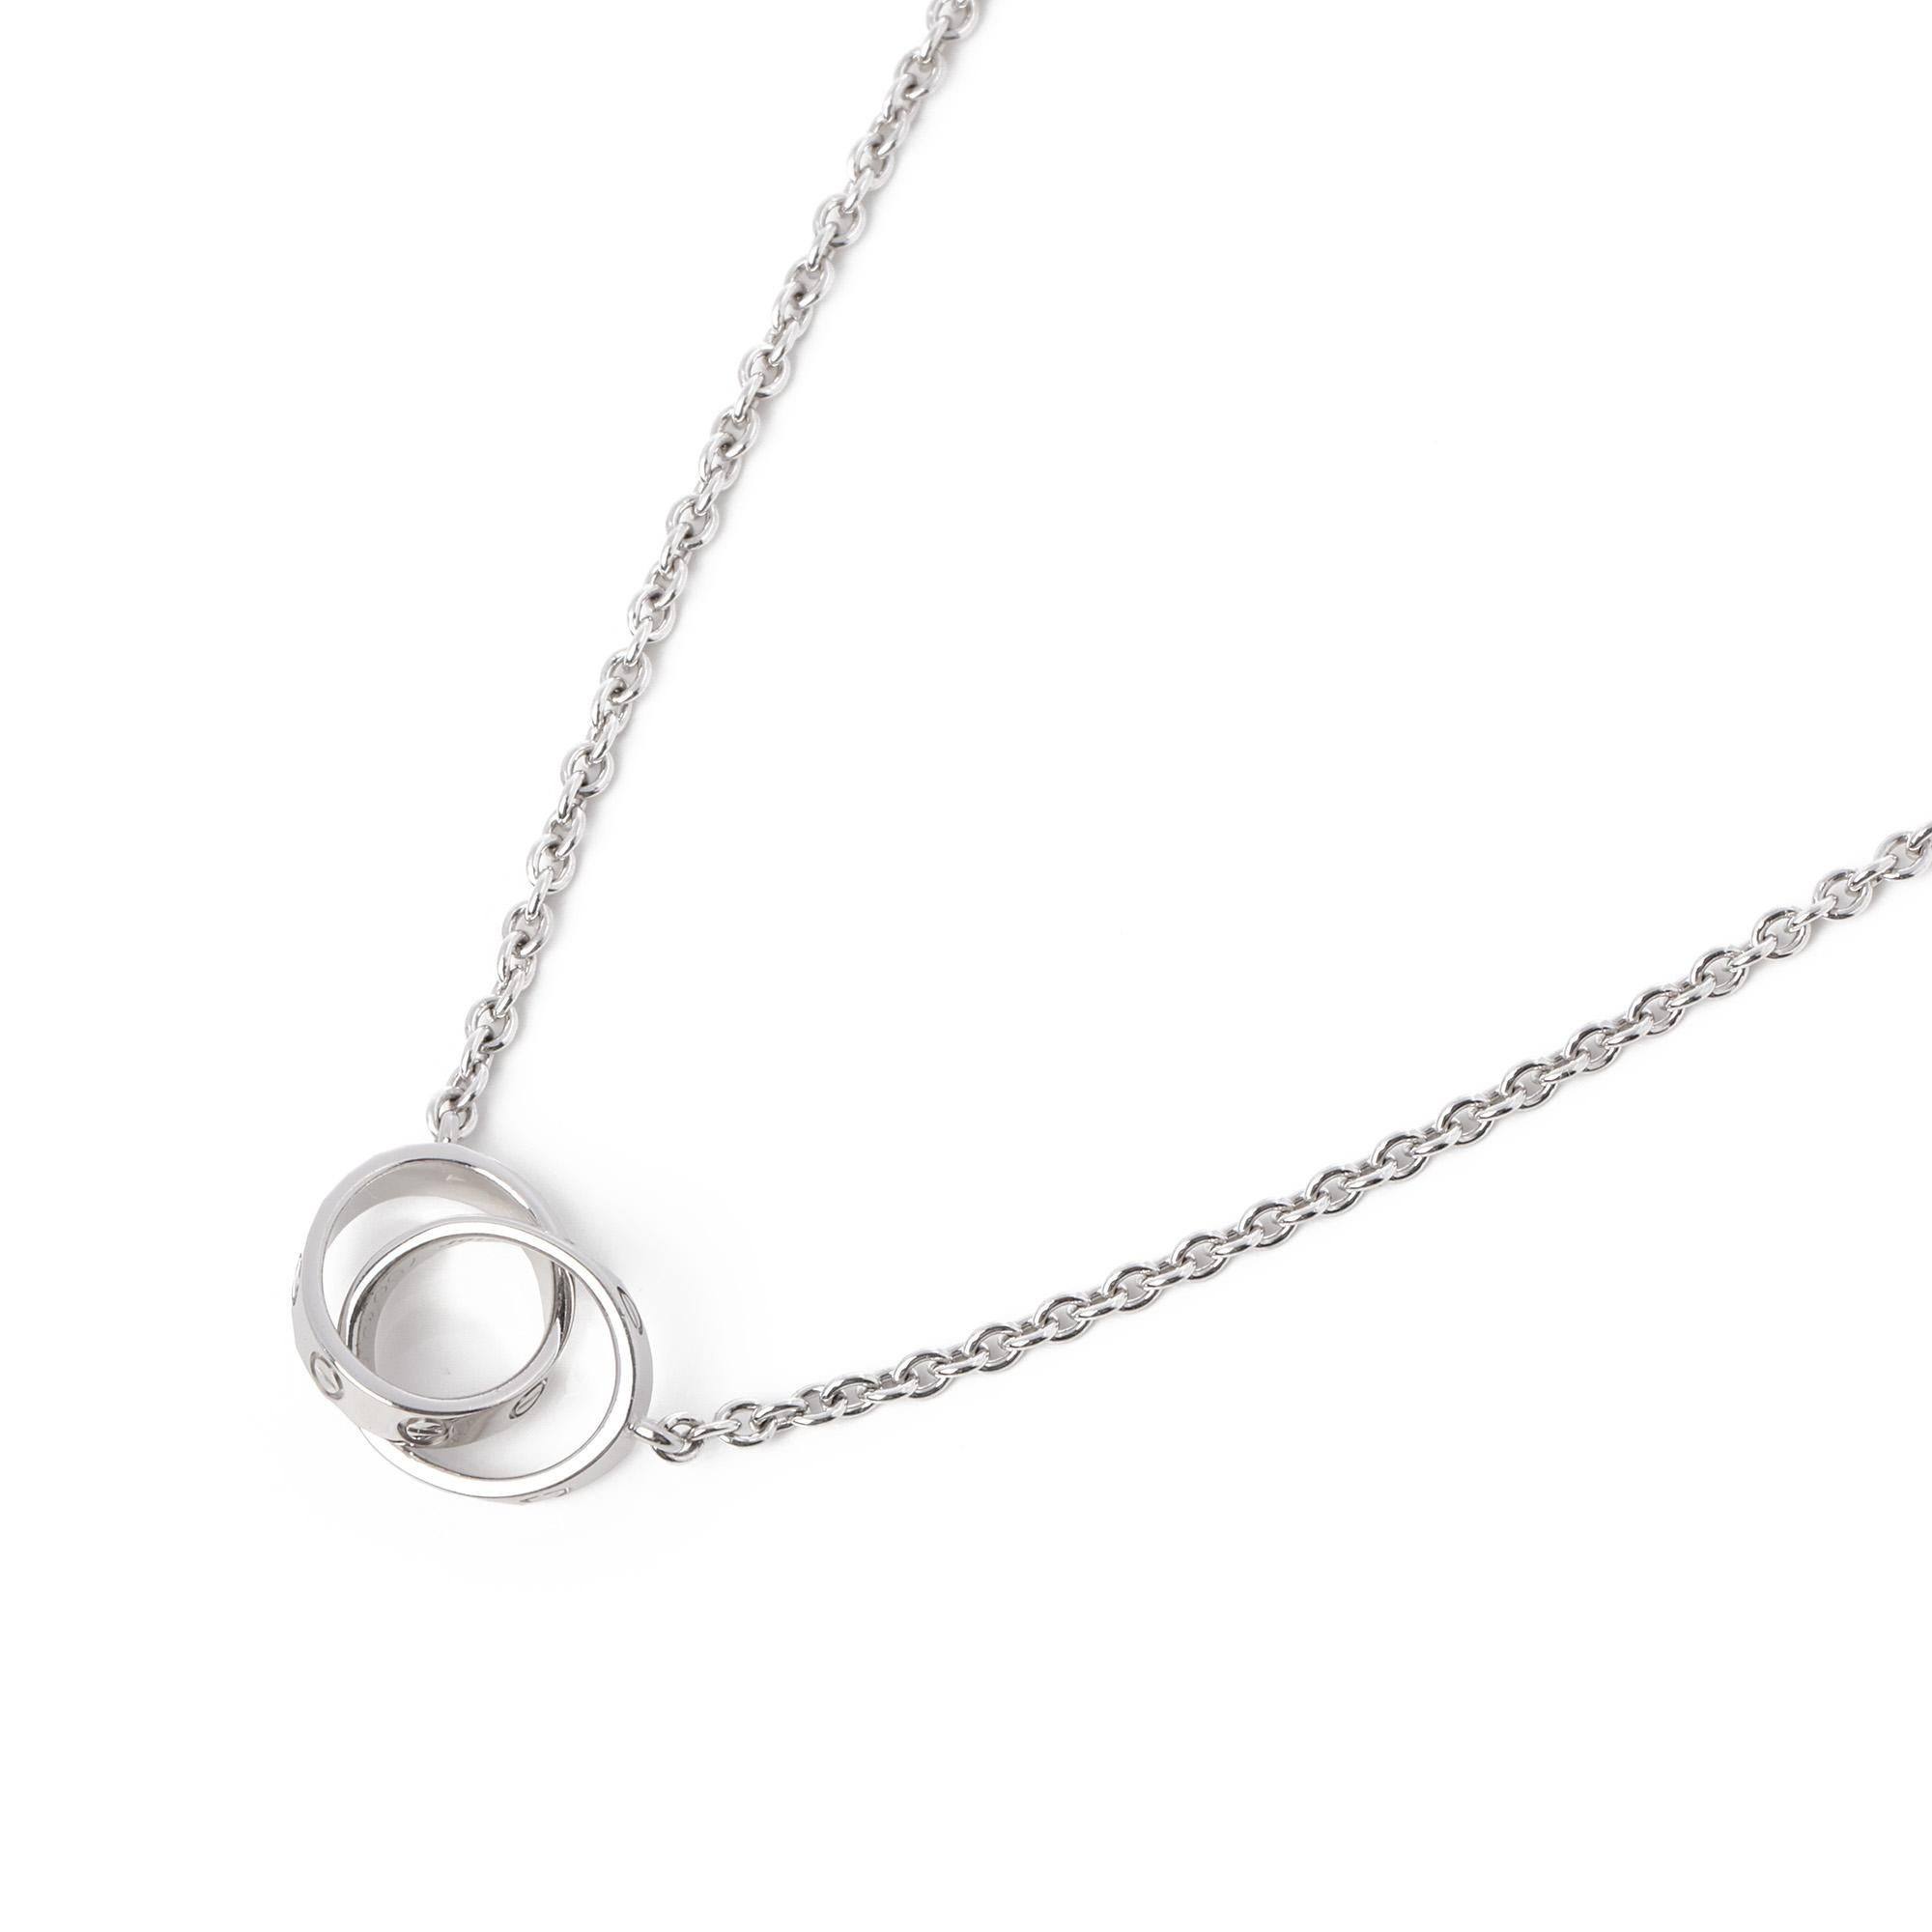 This necklace by Cartier is from their Love collection and features two interlinking pendants with their iconic screw detailing, set in 18k white gold. Accompanied by a Xupes presentation box. Our Xupes reference is J559 should you need to quote